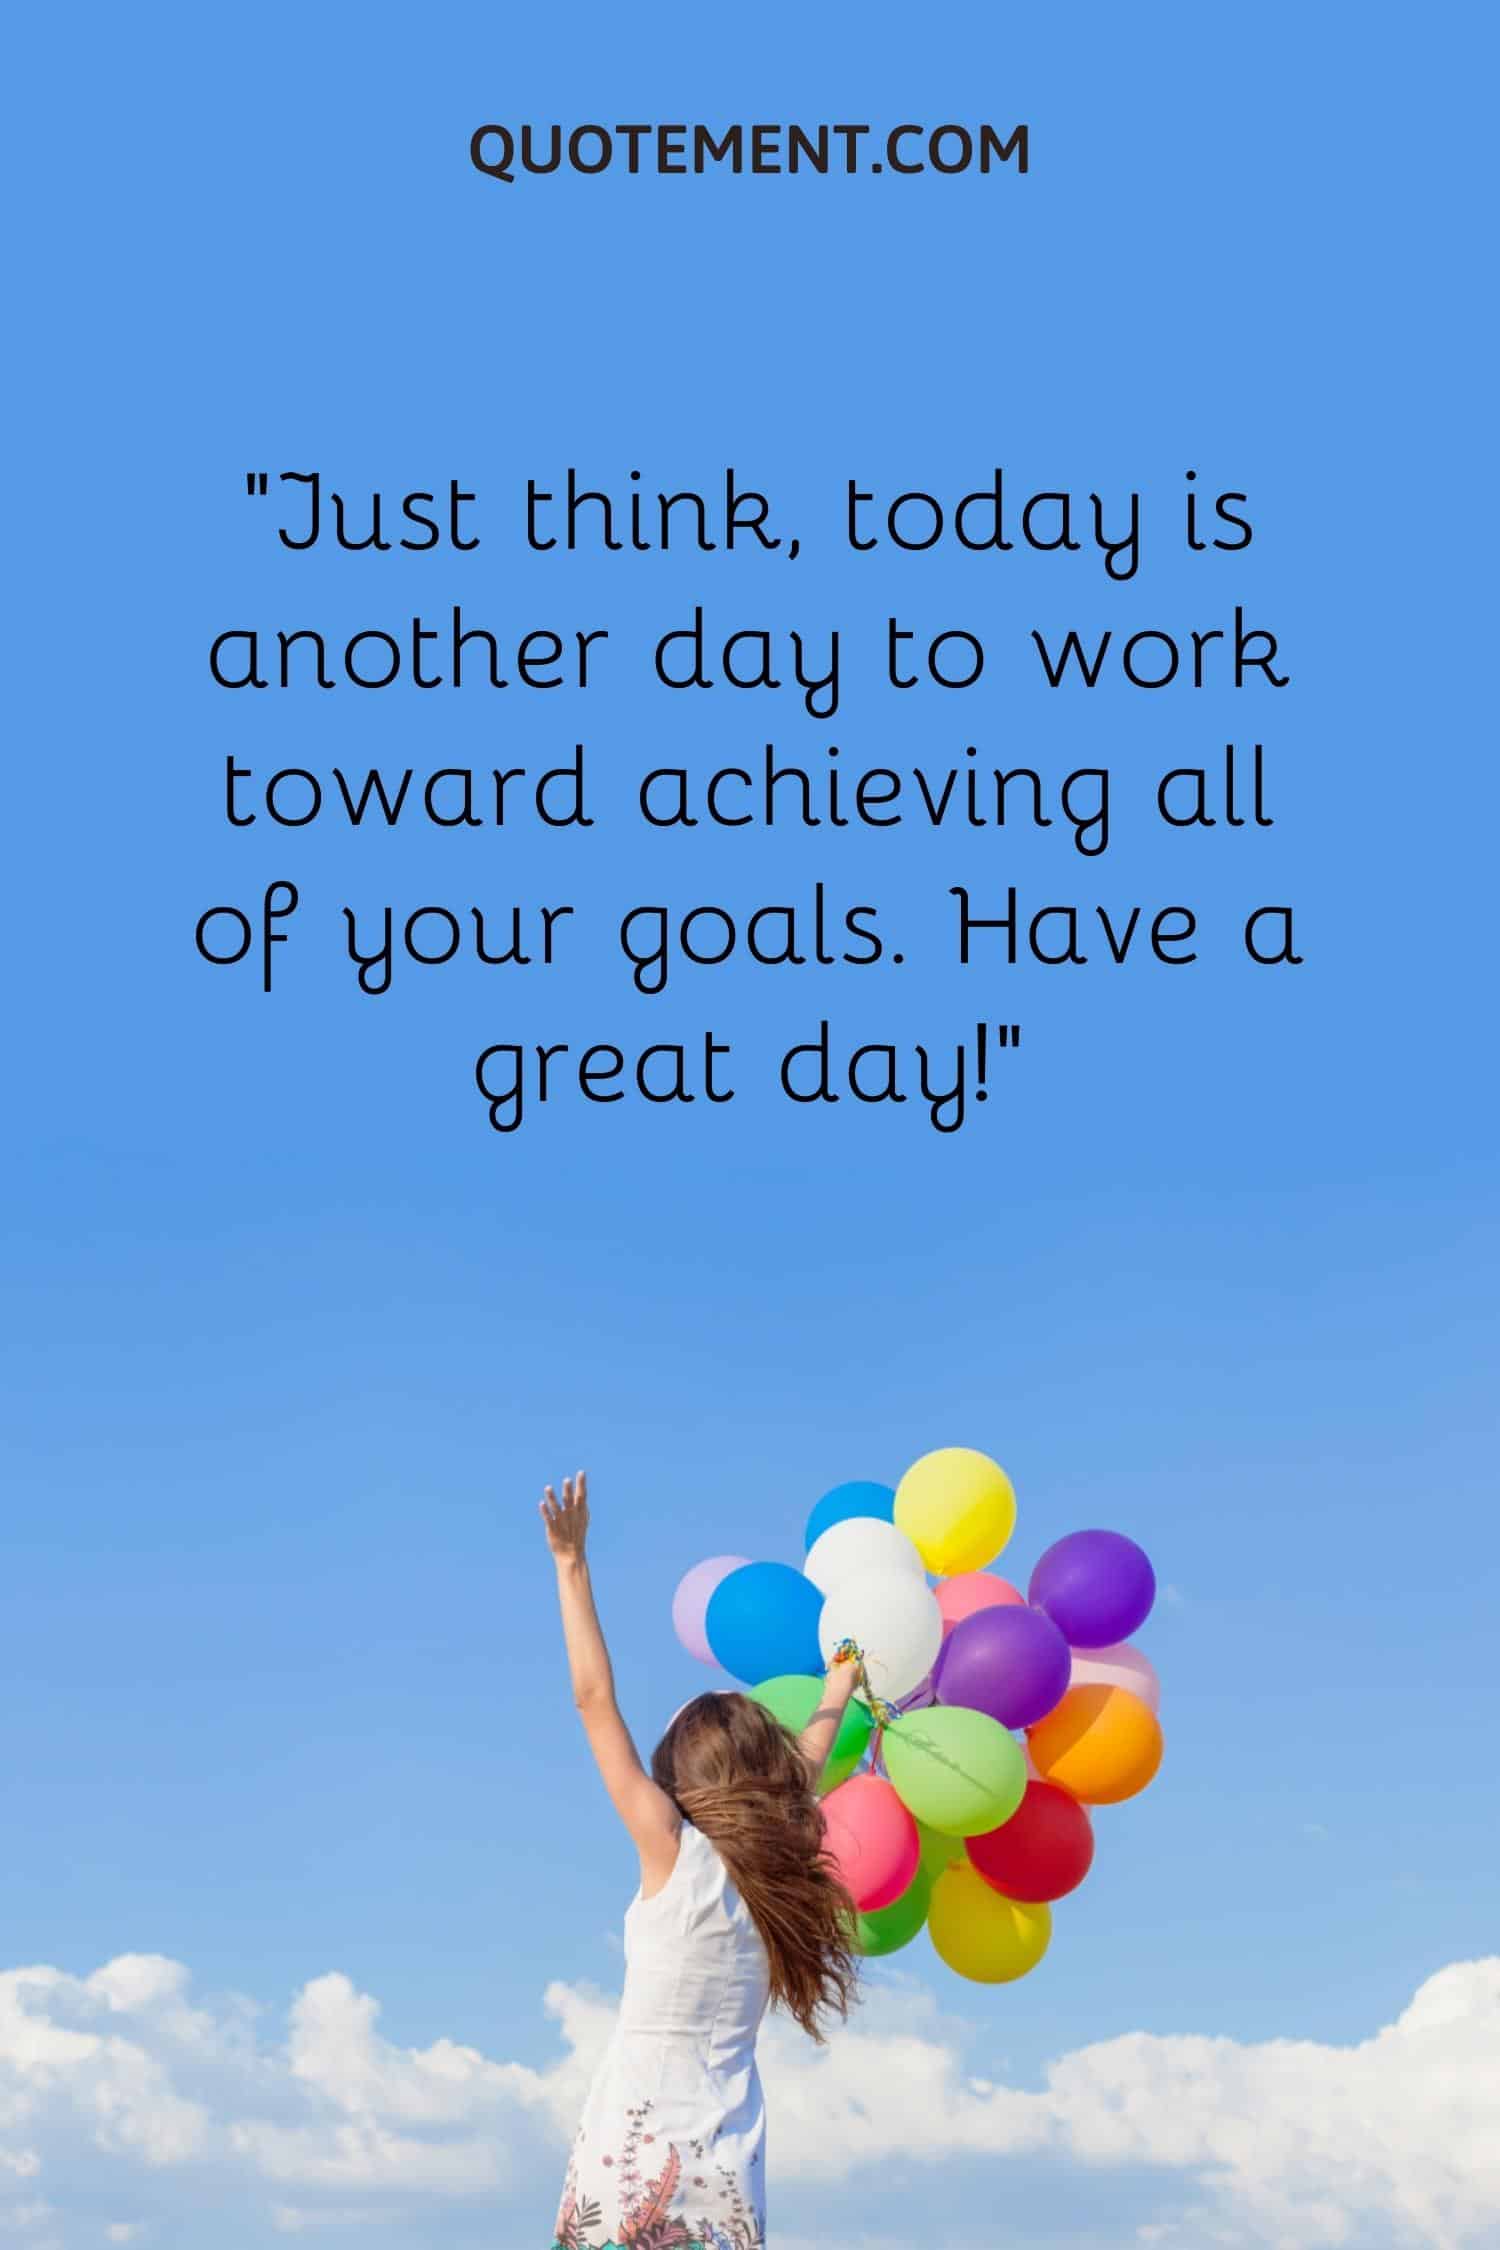 Just think, today is another day to work toward achieving all of your goals